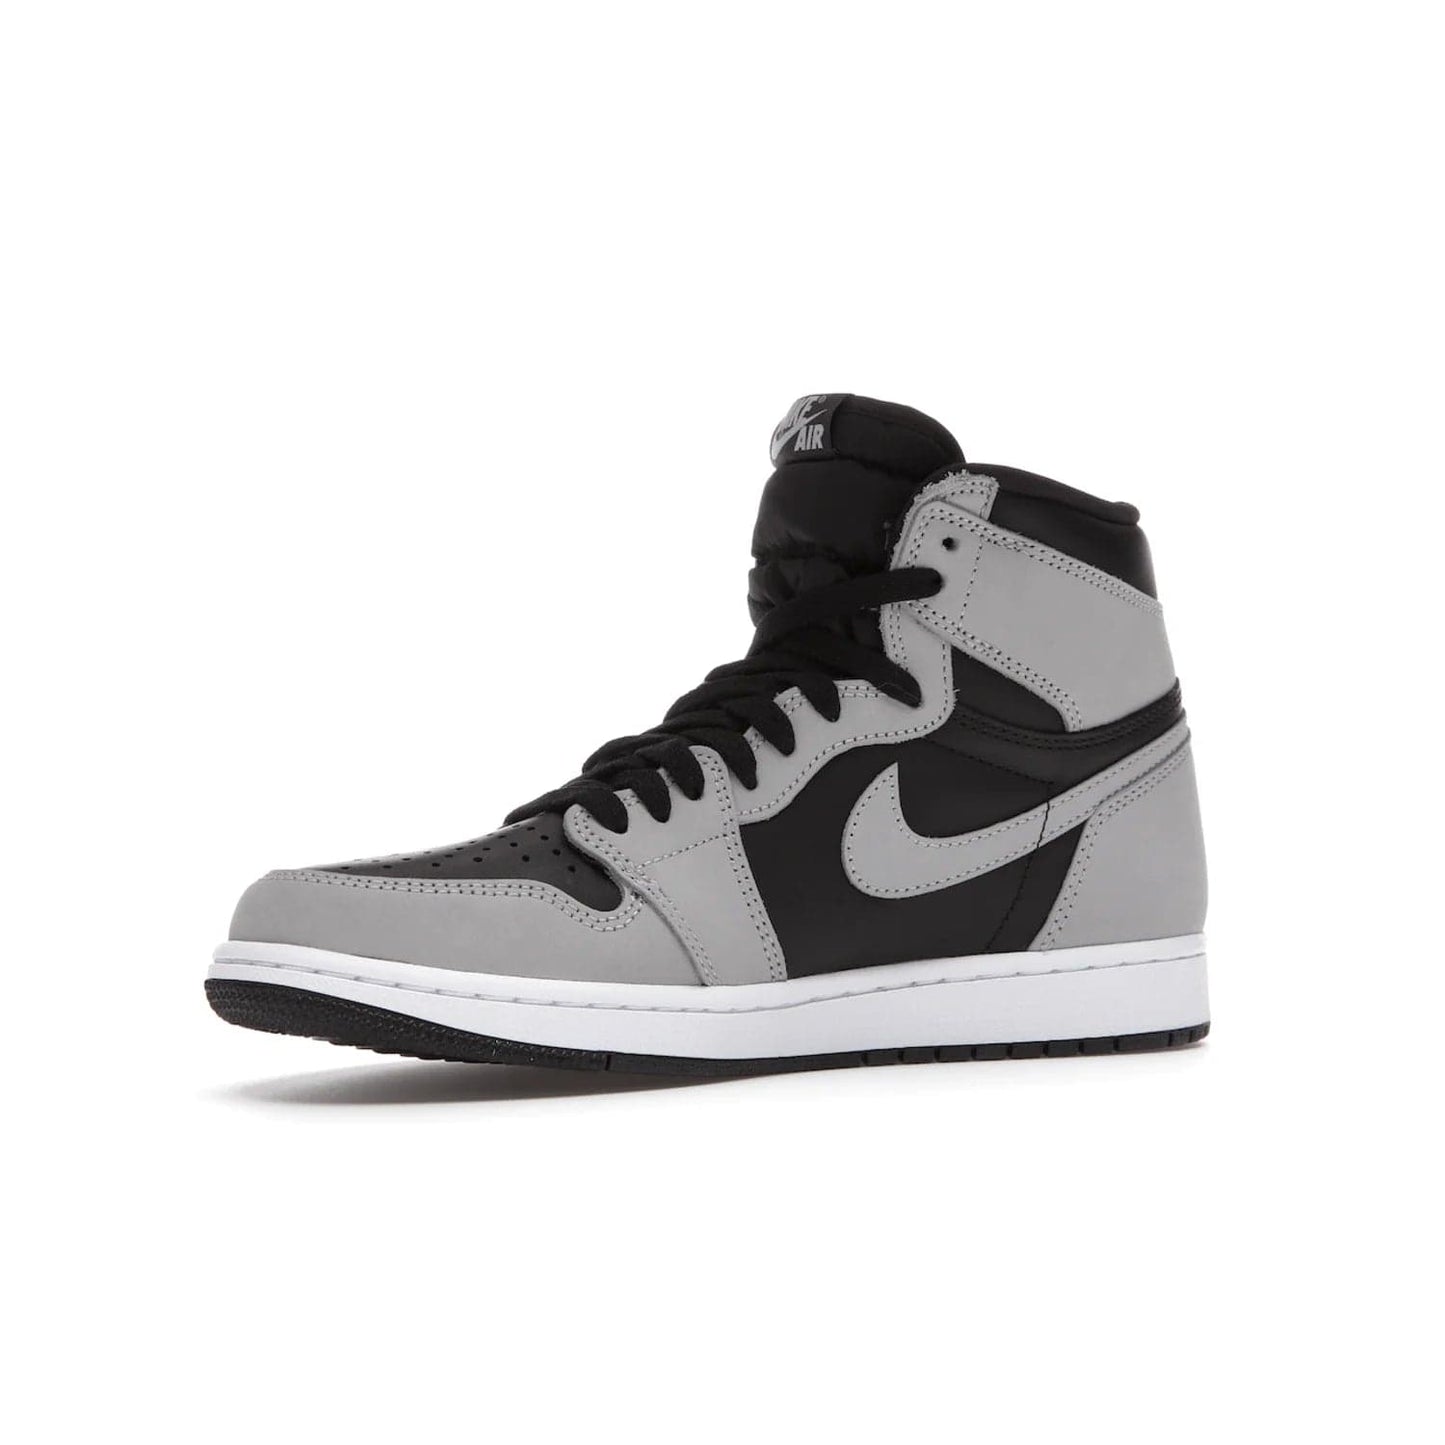 Jordan 1 Retro High Shadow 2.0 - Image 16 - Only at www.BallersClubKickz.com - #
Classic Air Jordan 1 Retro High Shadow 2.0 with black leather base and Light Smoke Grey overlays. Released in May 2021.